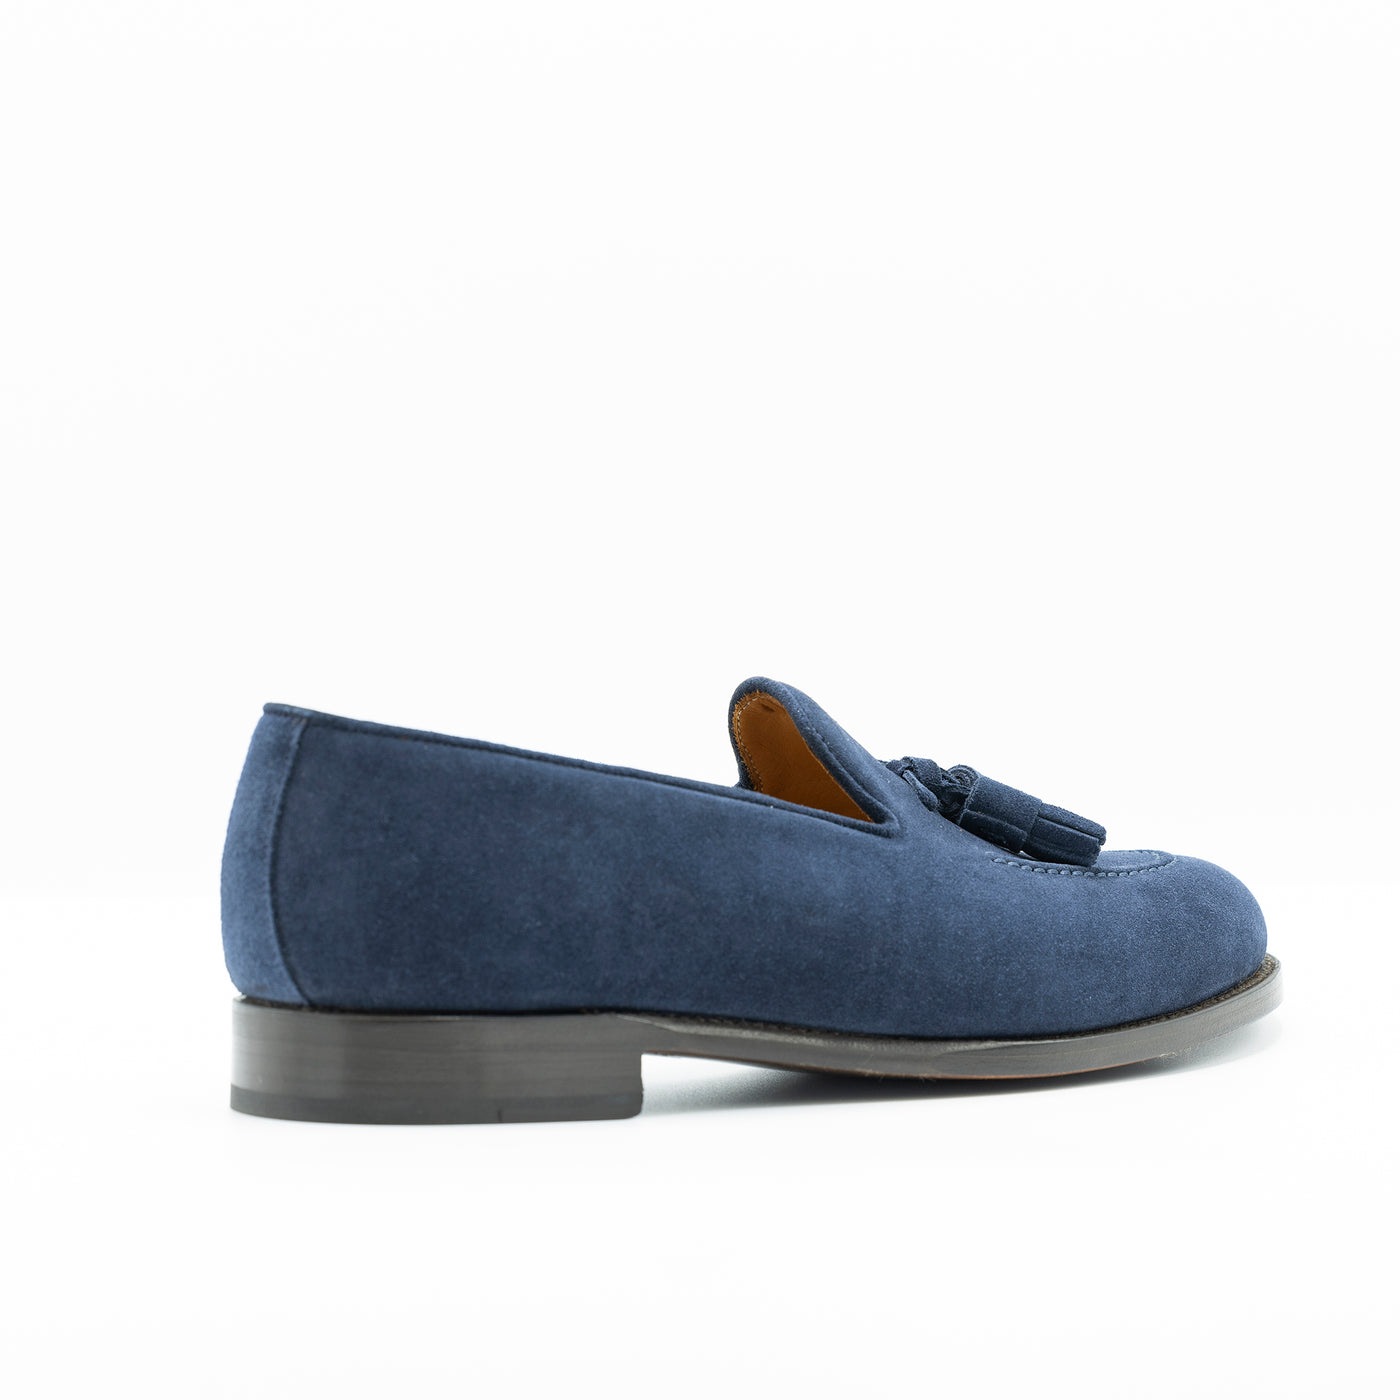 Men's blue suede tassel loafer on edgestitched leather soles.  